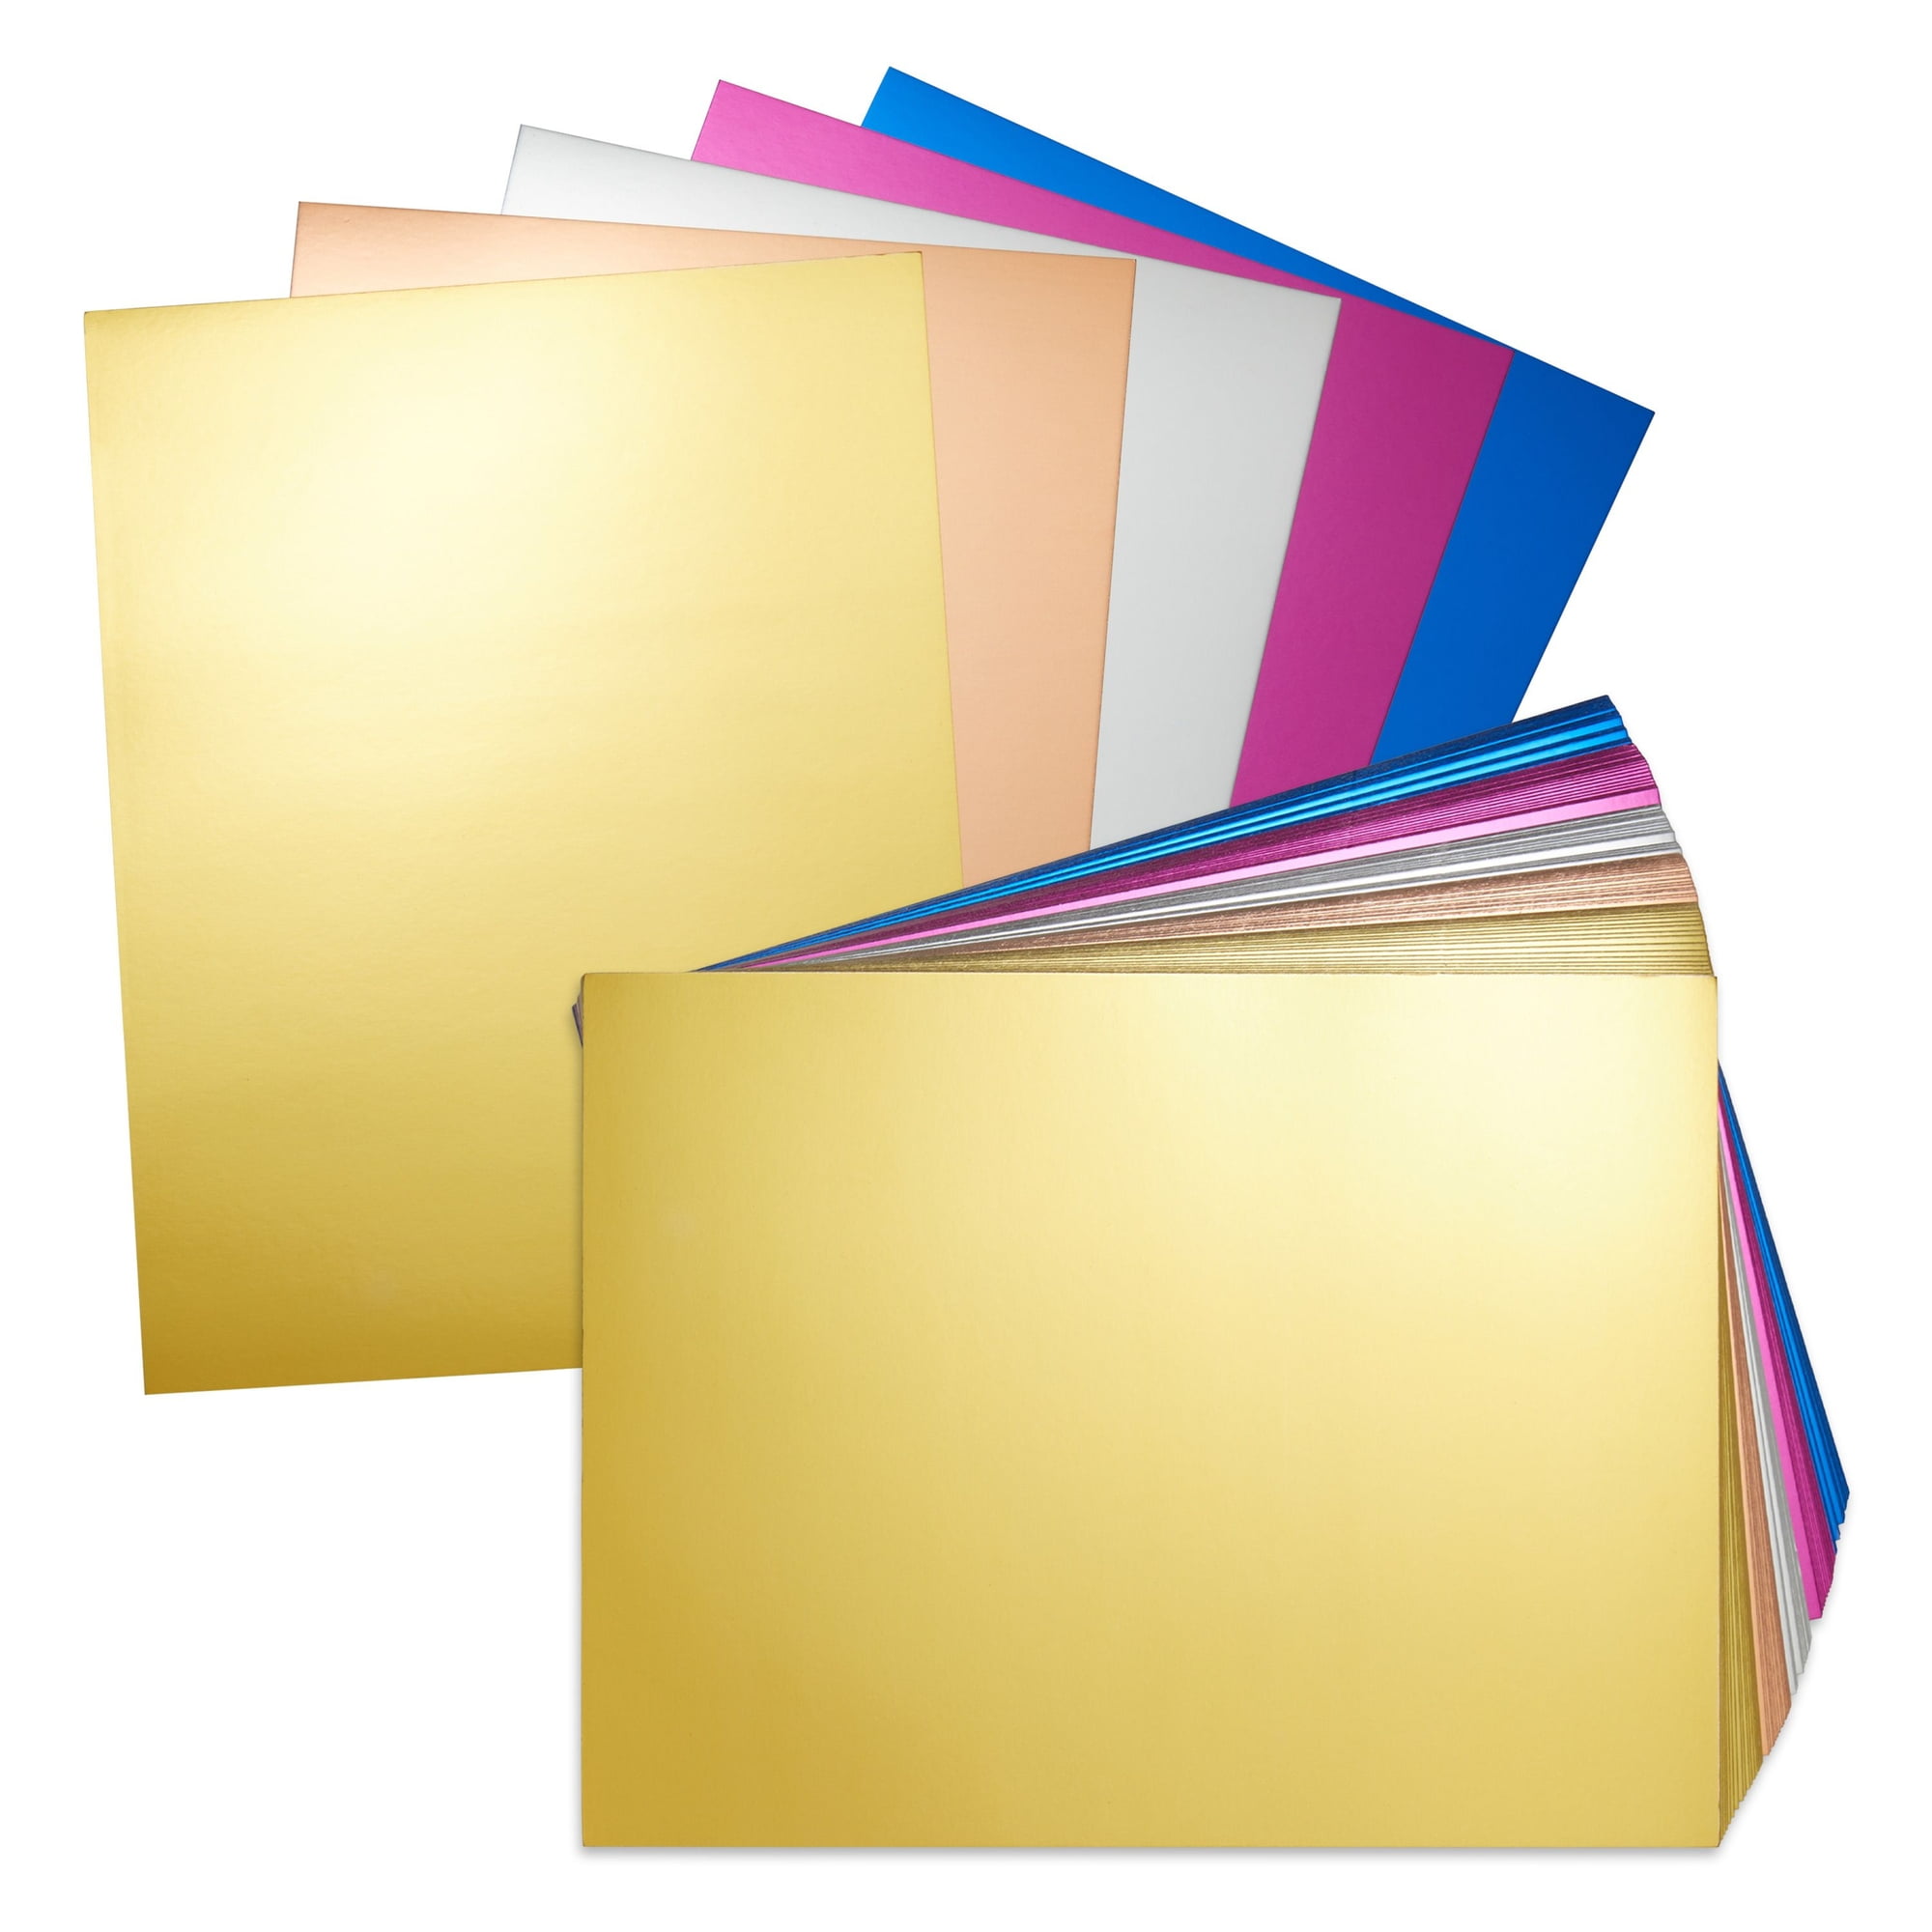 20 Sheets Colored Thick Paper Cardstock Blank for DIY Crafts Cards Making,  Invitations, Scrapbook Supplies (Pink, 8.5 x 11 inches)